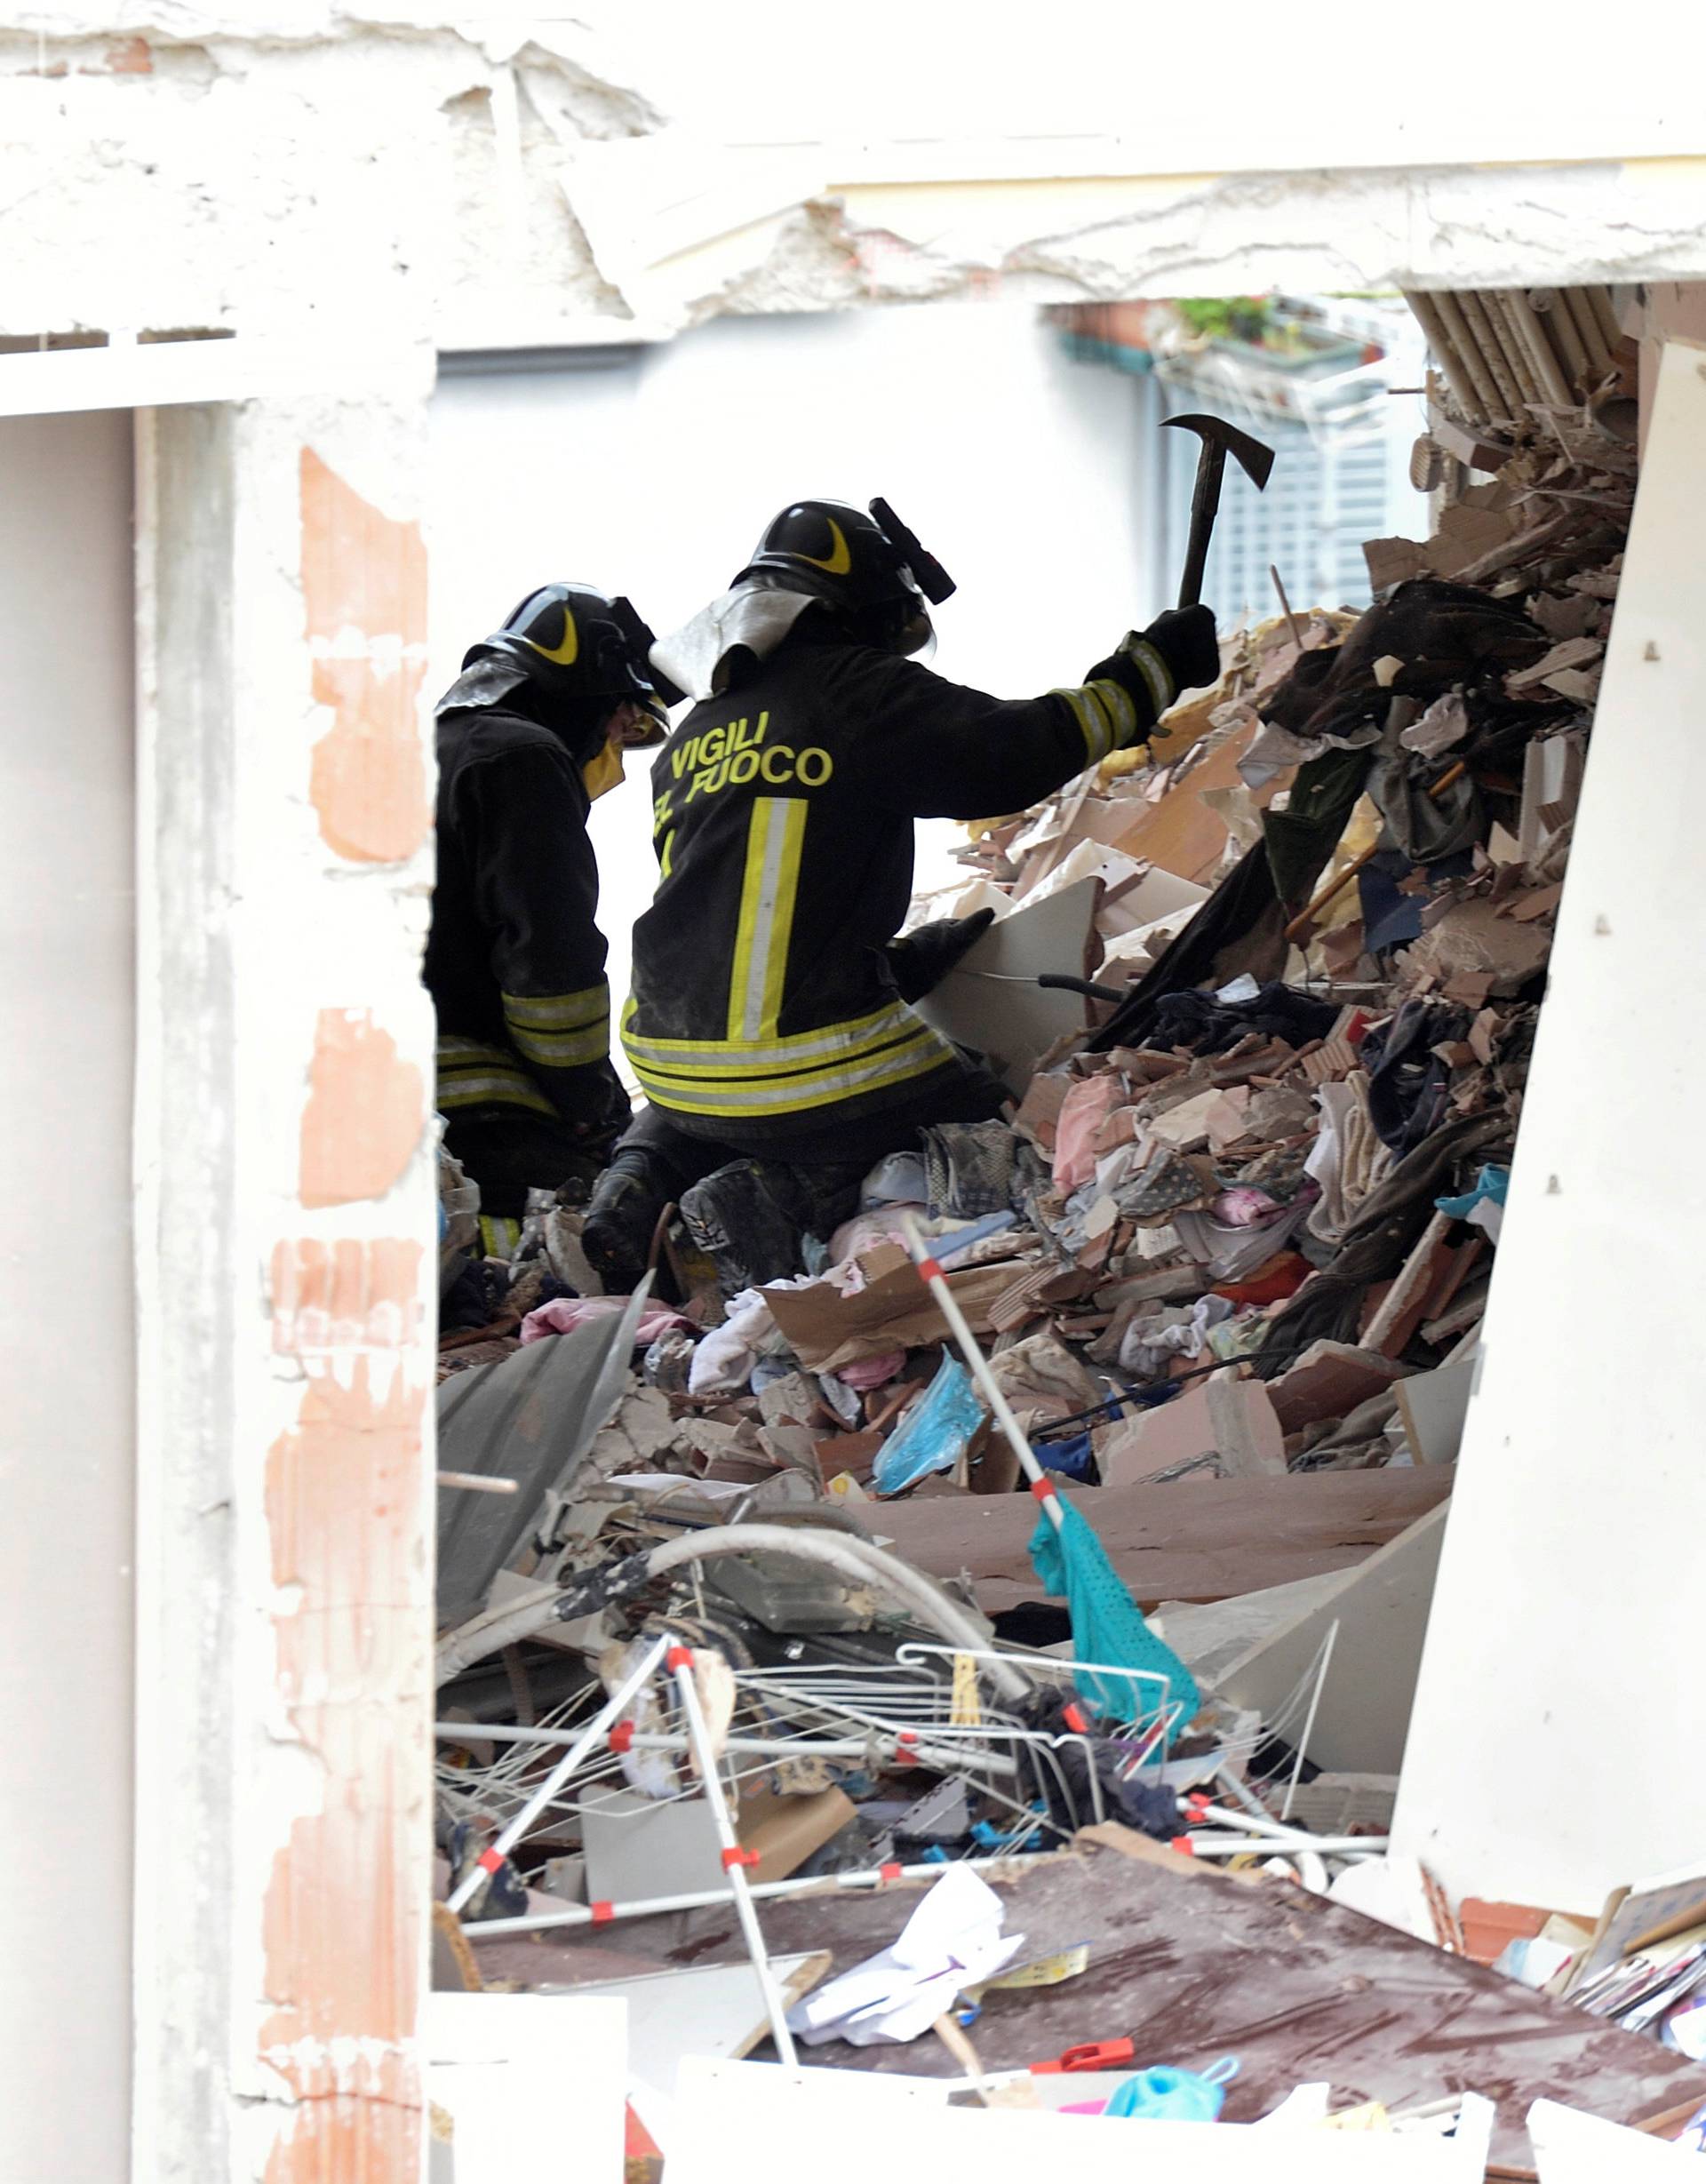 Italian firefighters work in the debris after a residential building partially collapsed on Sunday following an explosion in Milan